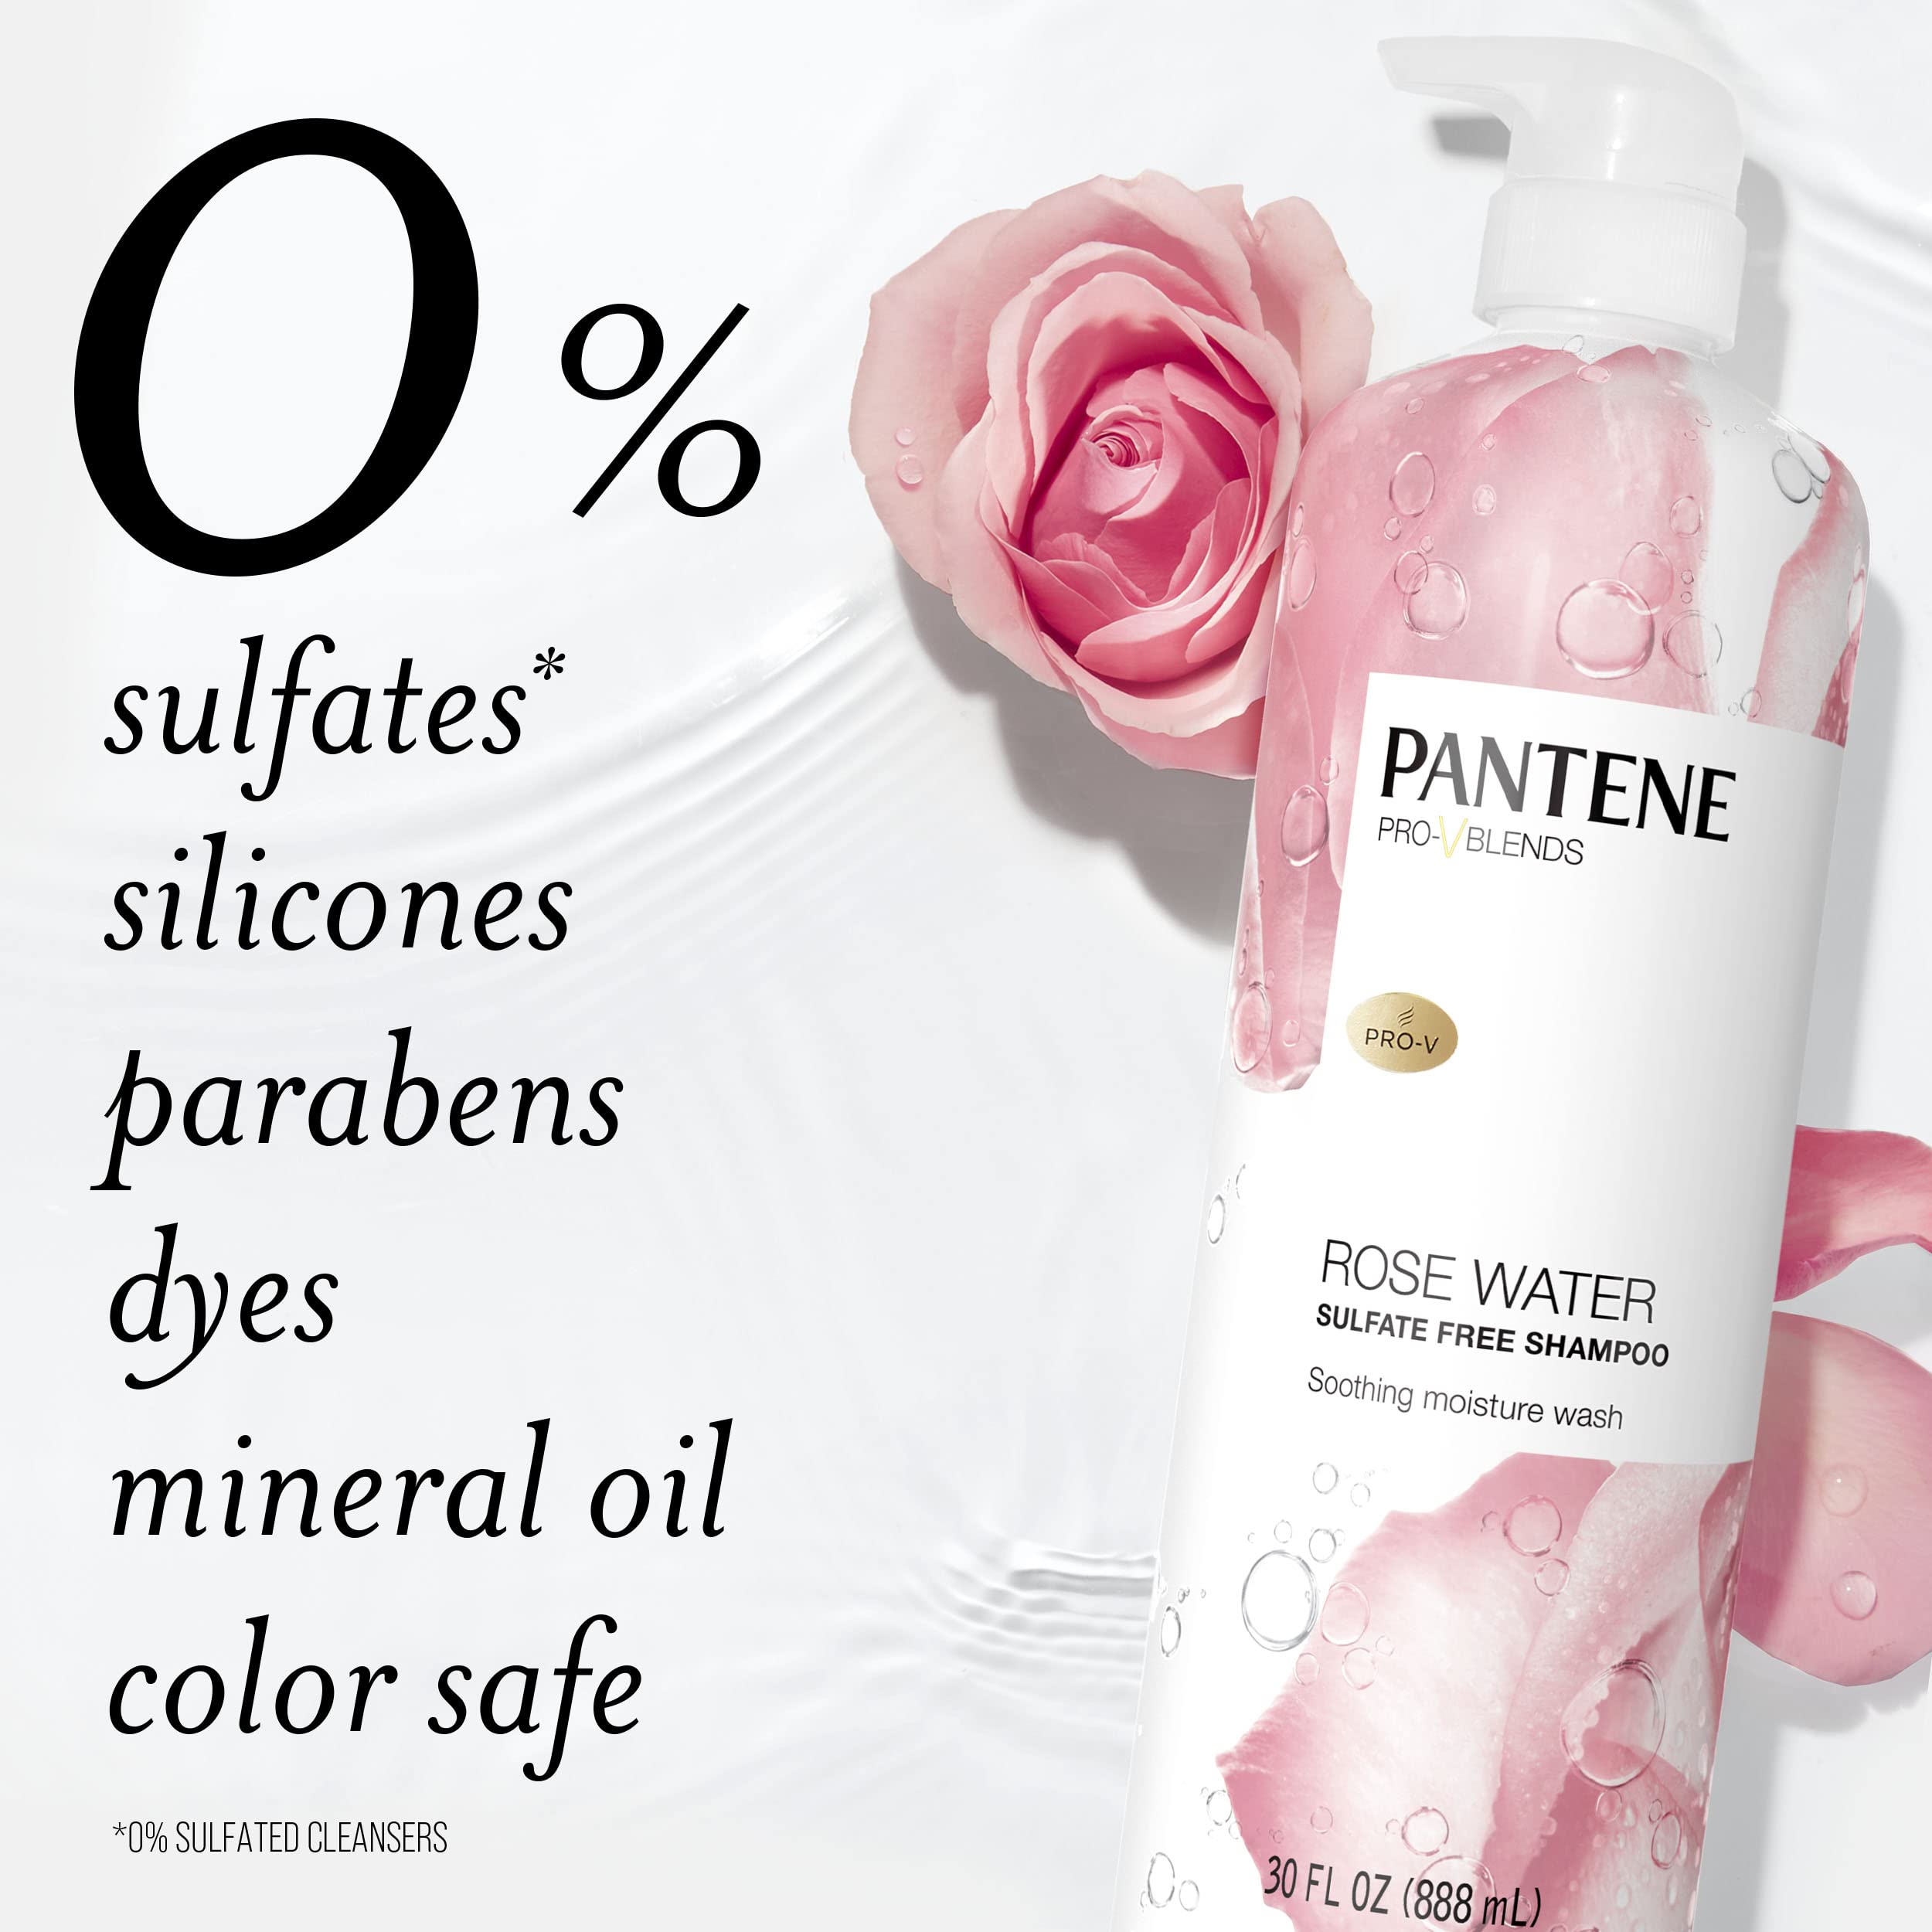 Pantene Sulfate Free Rose Water Shampoo, Soothes, Replenishes Hydration, Safe for Color Treated Hair, Nutrient Infused with Vitamin B5 and Antioxidants, Pro-V Blends, 30.0 oz